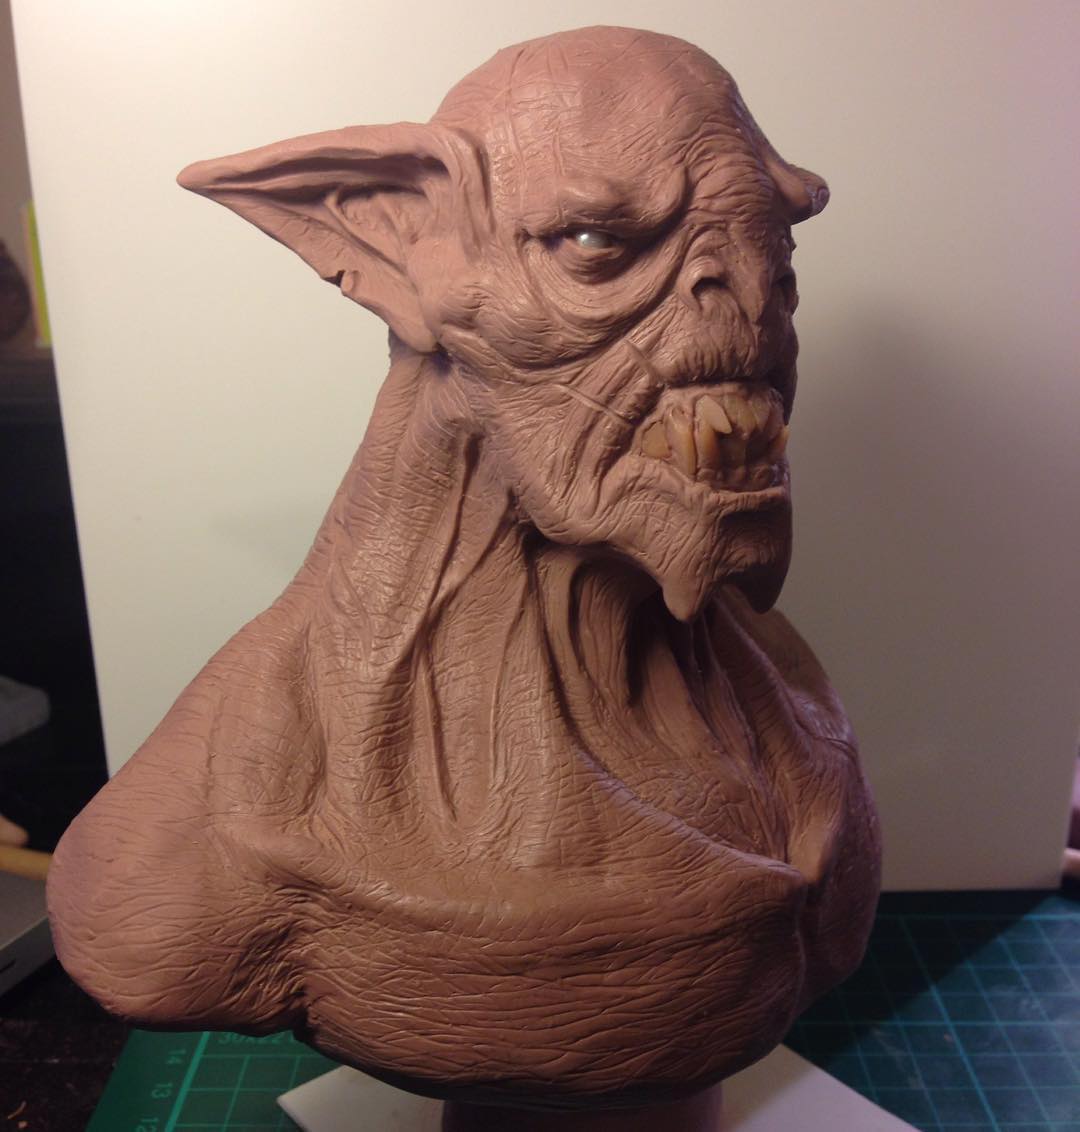 Monster Clay on X: Monster Clay Sculpt of the Day 5/19/18 📷: (INSTA)  @creaturehut Meet this lovely Orc, he likes flowers and picnics #orc  #hobbit #sfx #monsterclay #clay #sculpting #sculpture #art #fantasy #